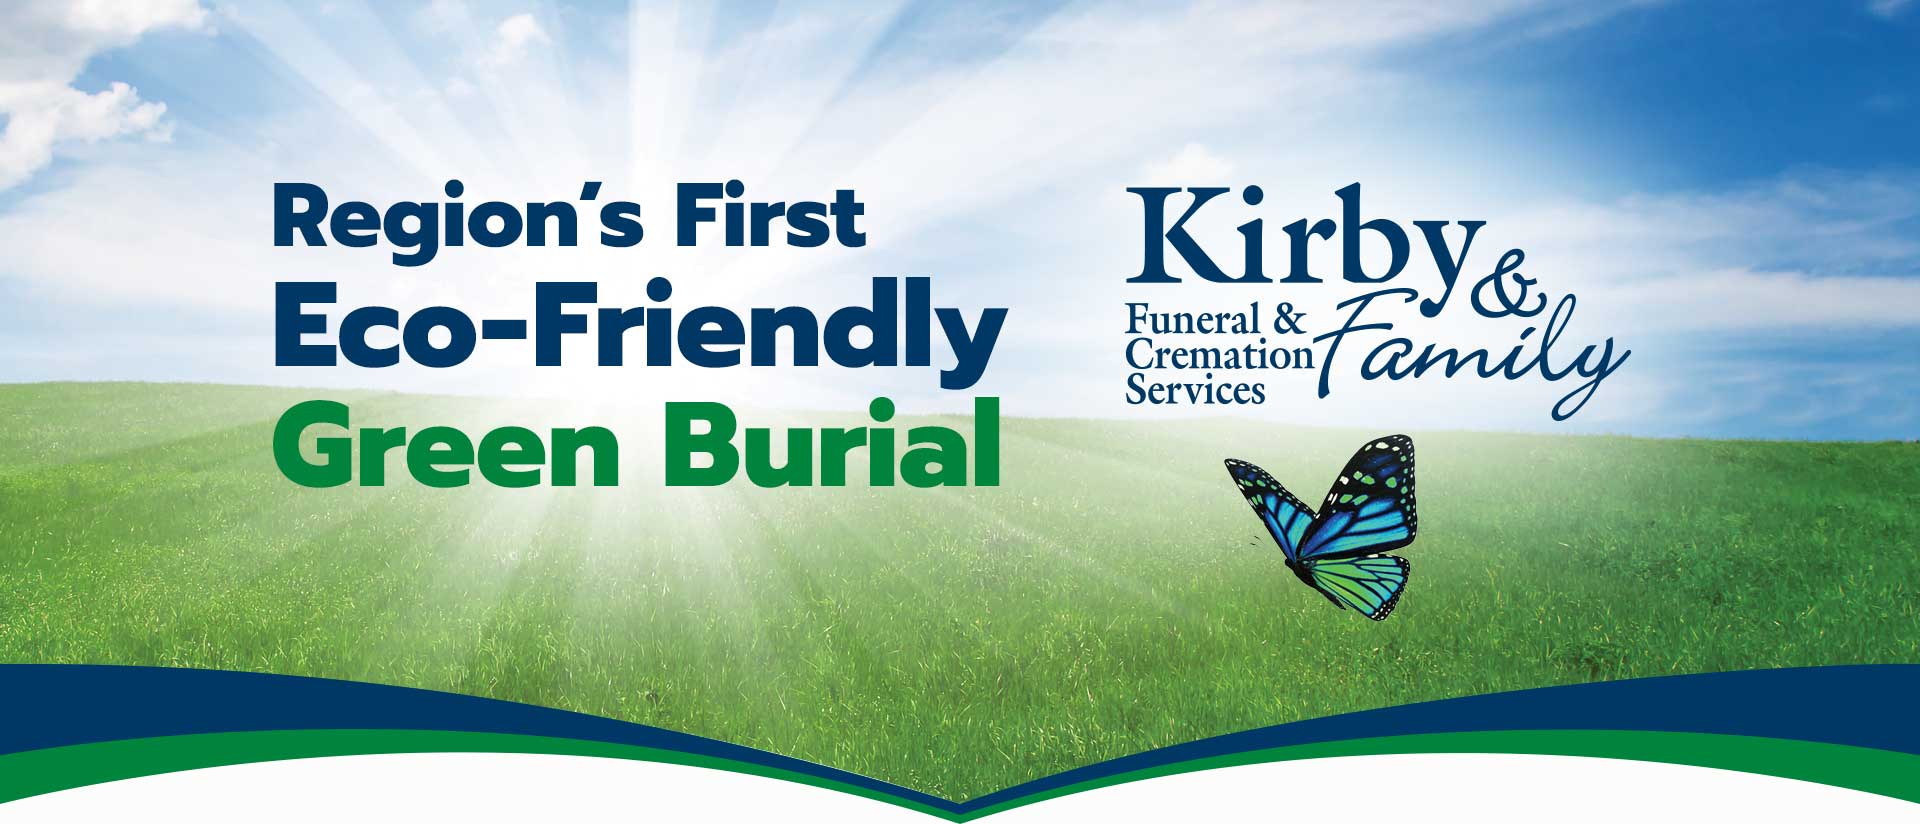 Kirby Funeral and Cremation Services Logo in front of Green Grass and Blue Skies